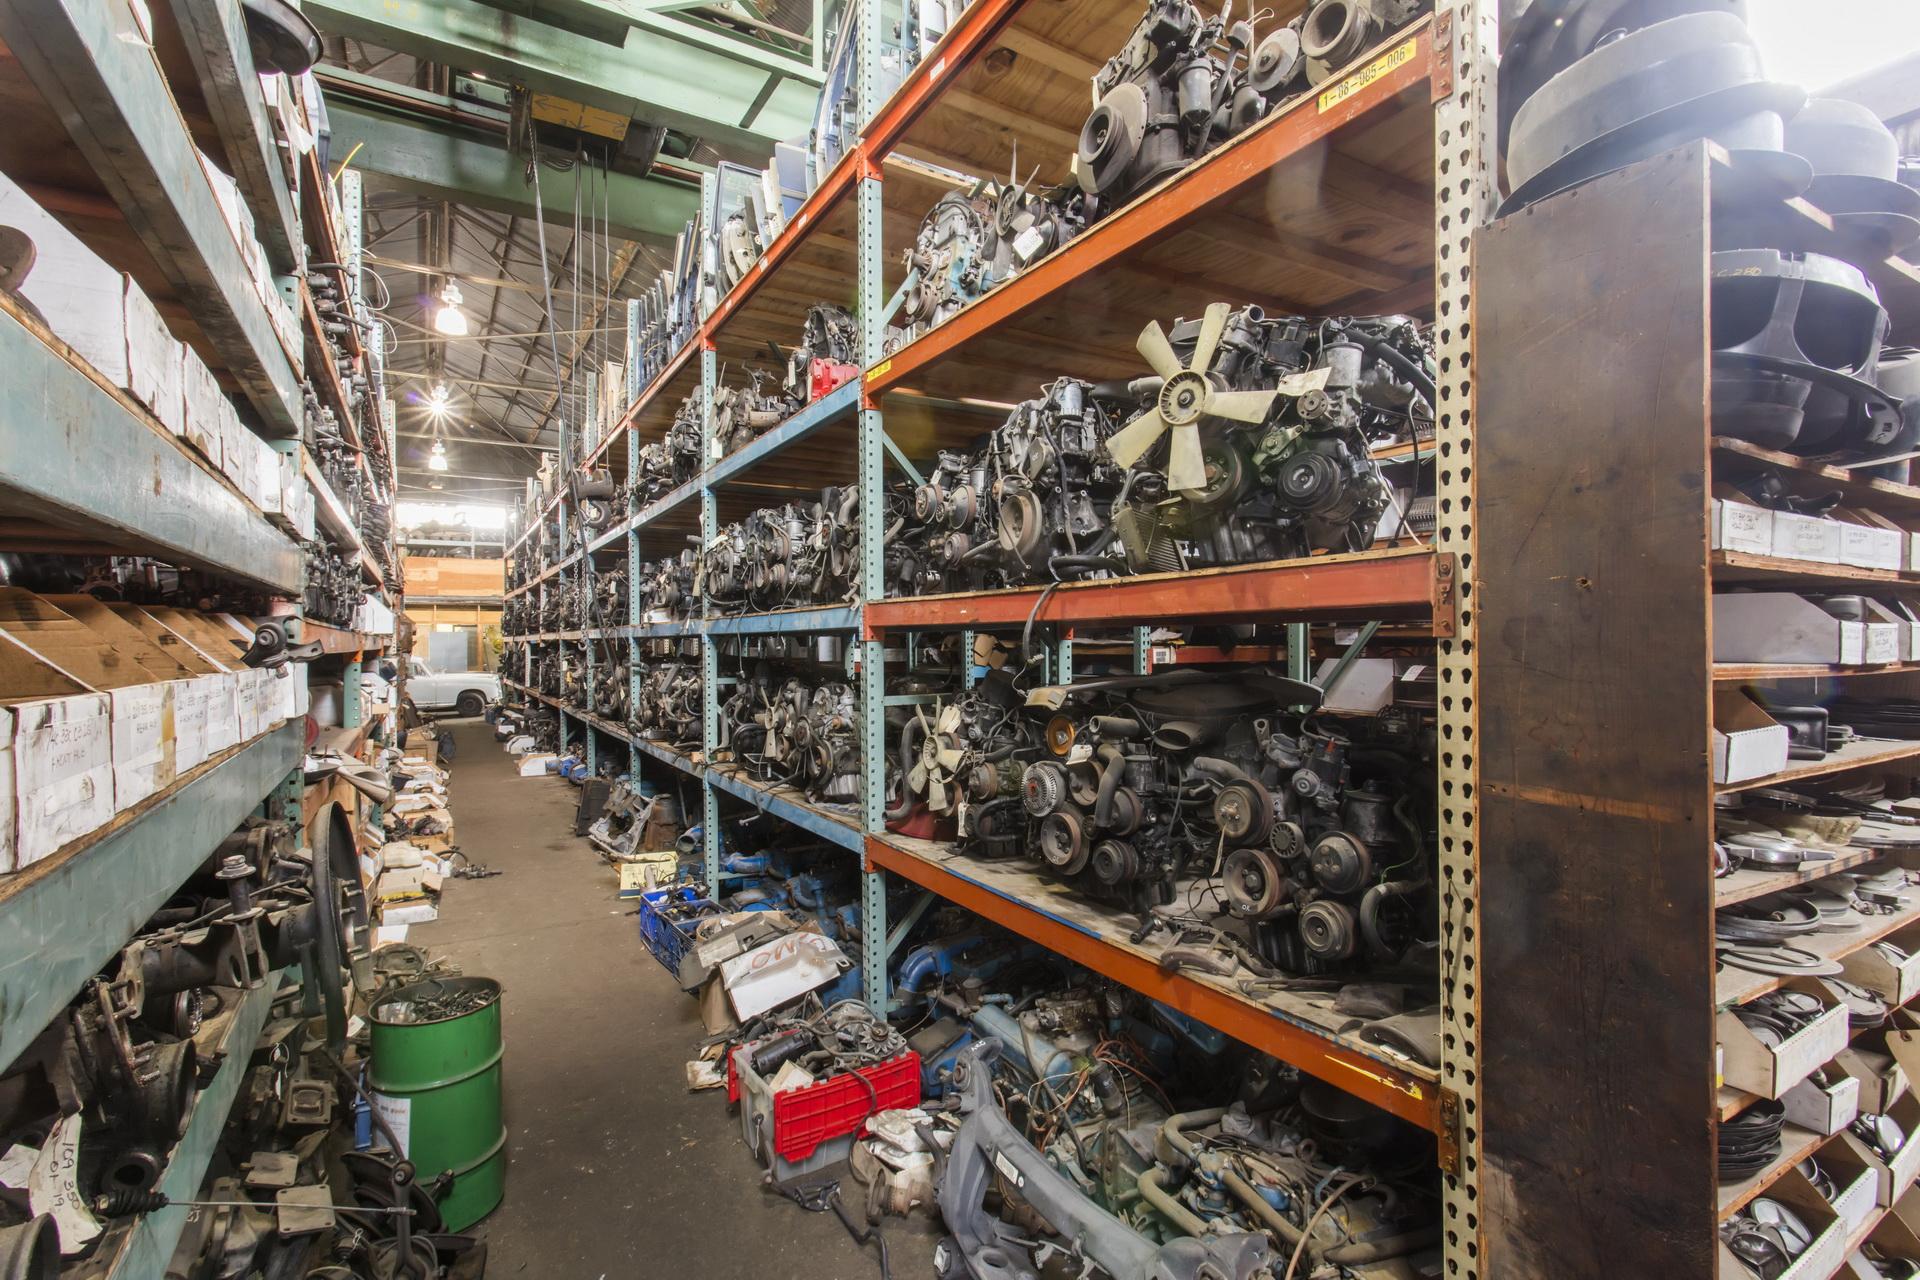 A Lifelong Collection of Expertly Curated Mercedes-Benz Parts from the 1950s to 2000s - One Lot